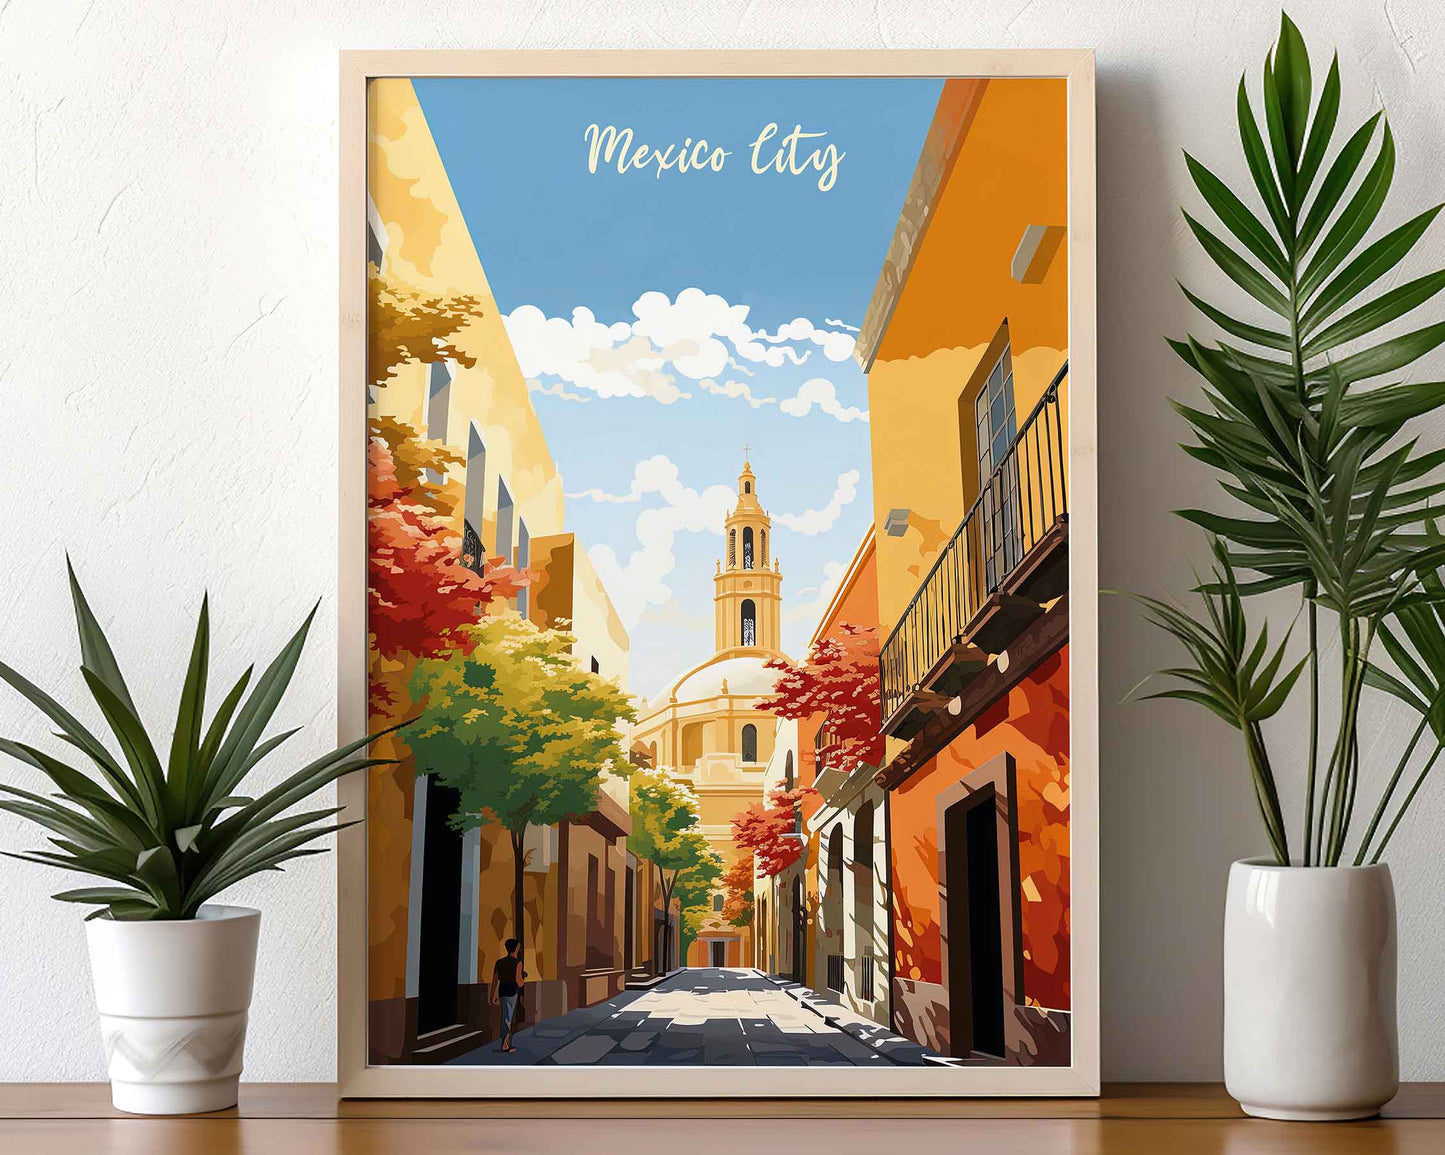 Framed Image of Mexico City Wall Art Travel Posters Illustration Prints